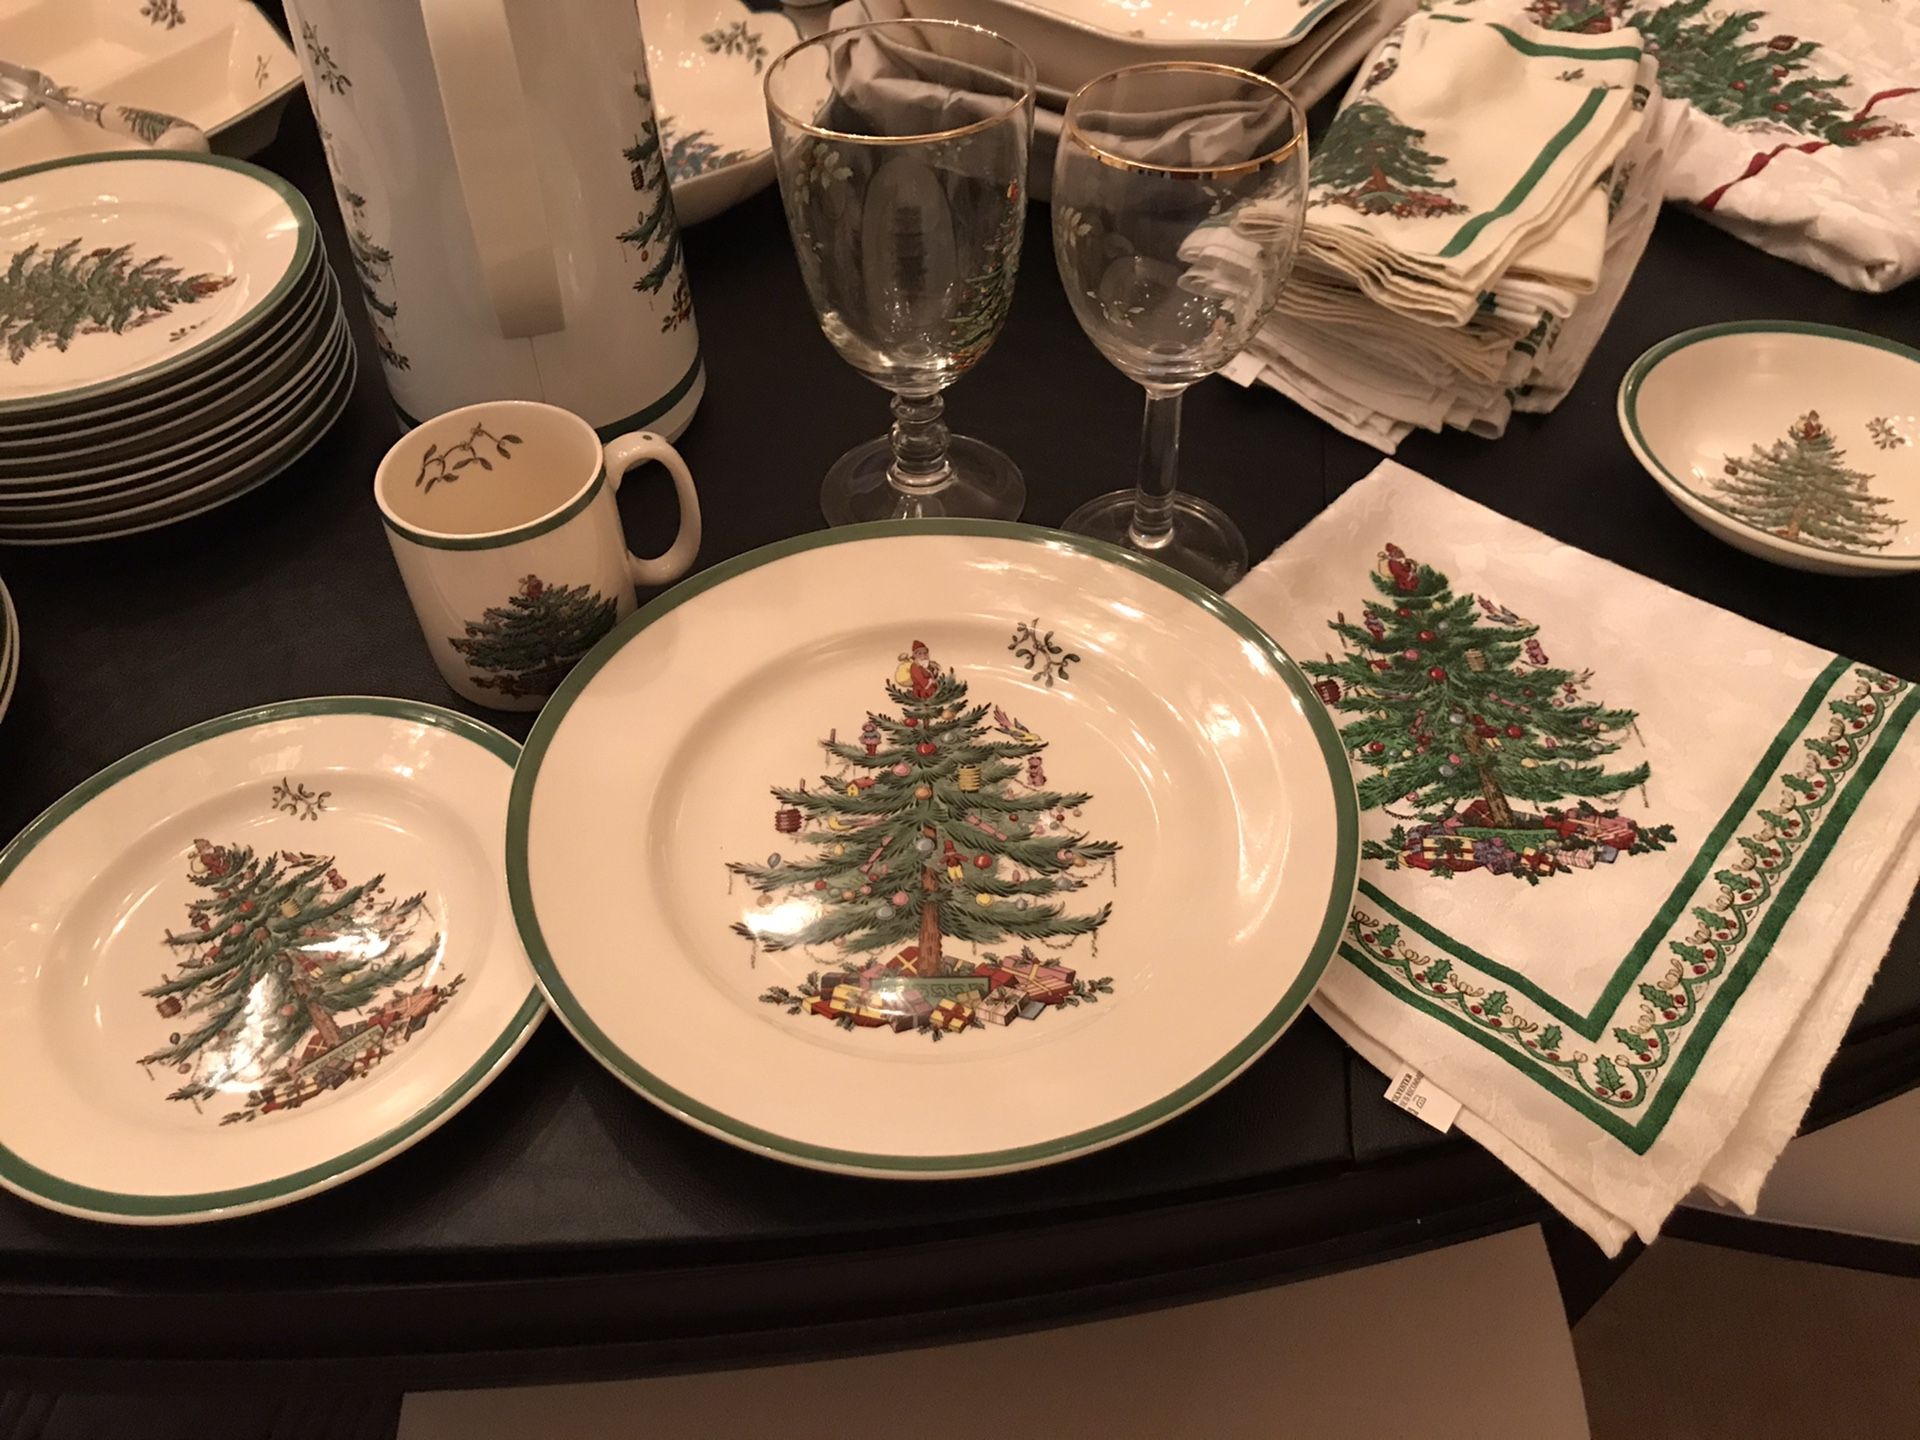 Spode Christmas dinnerware for 24 plus serving pieces and linens.